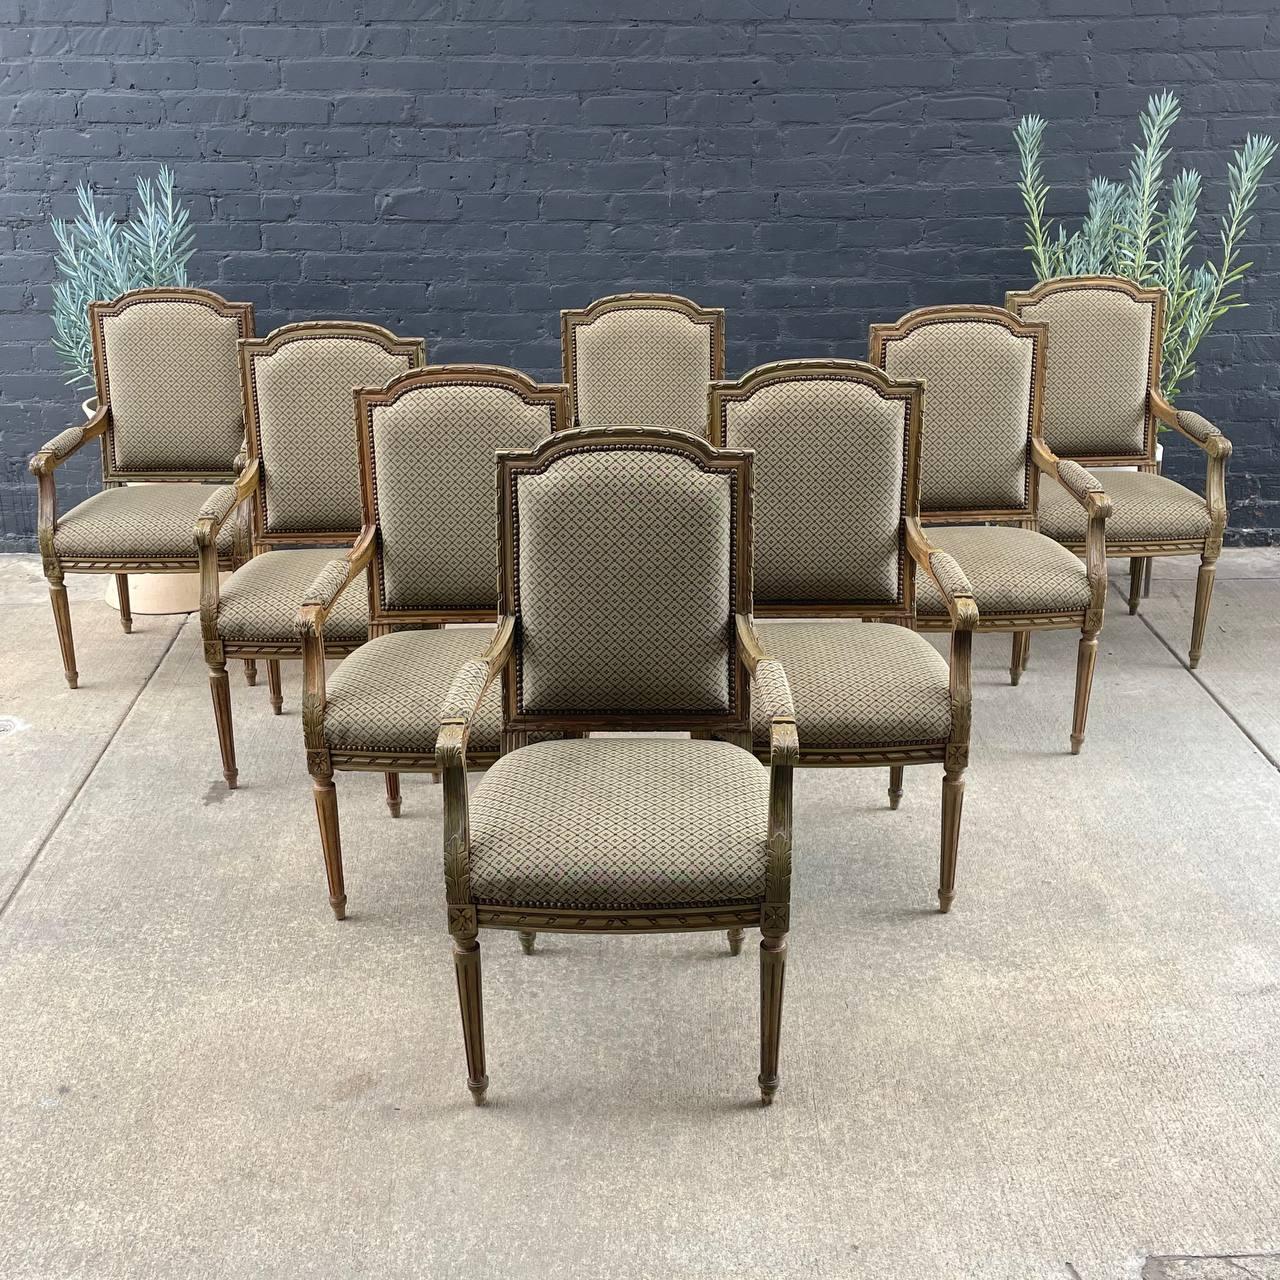 Set of 8 Vintage French Louis XV Sculpted Arm Chairs

Original Vintage Condition
Materials: Painted Wood, Spring Cushions
Dimensions: 
42”H x 23”W x 22”D
Seat Height 19”